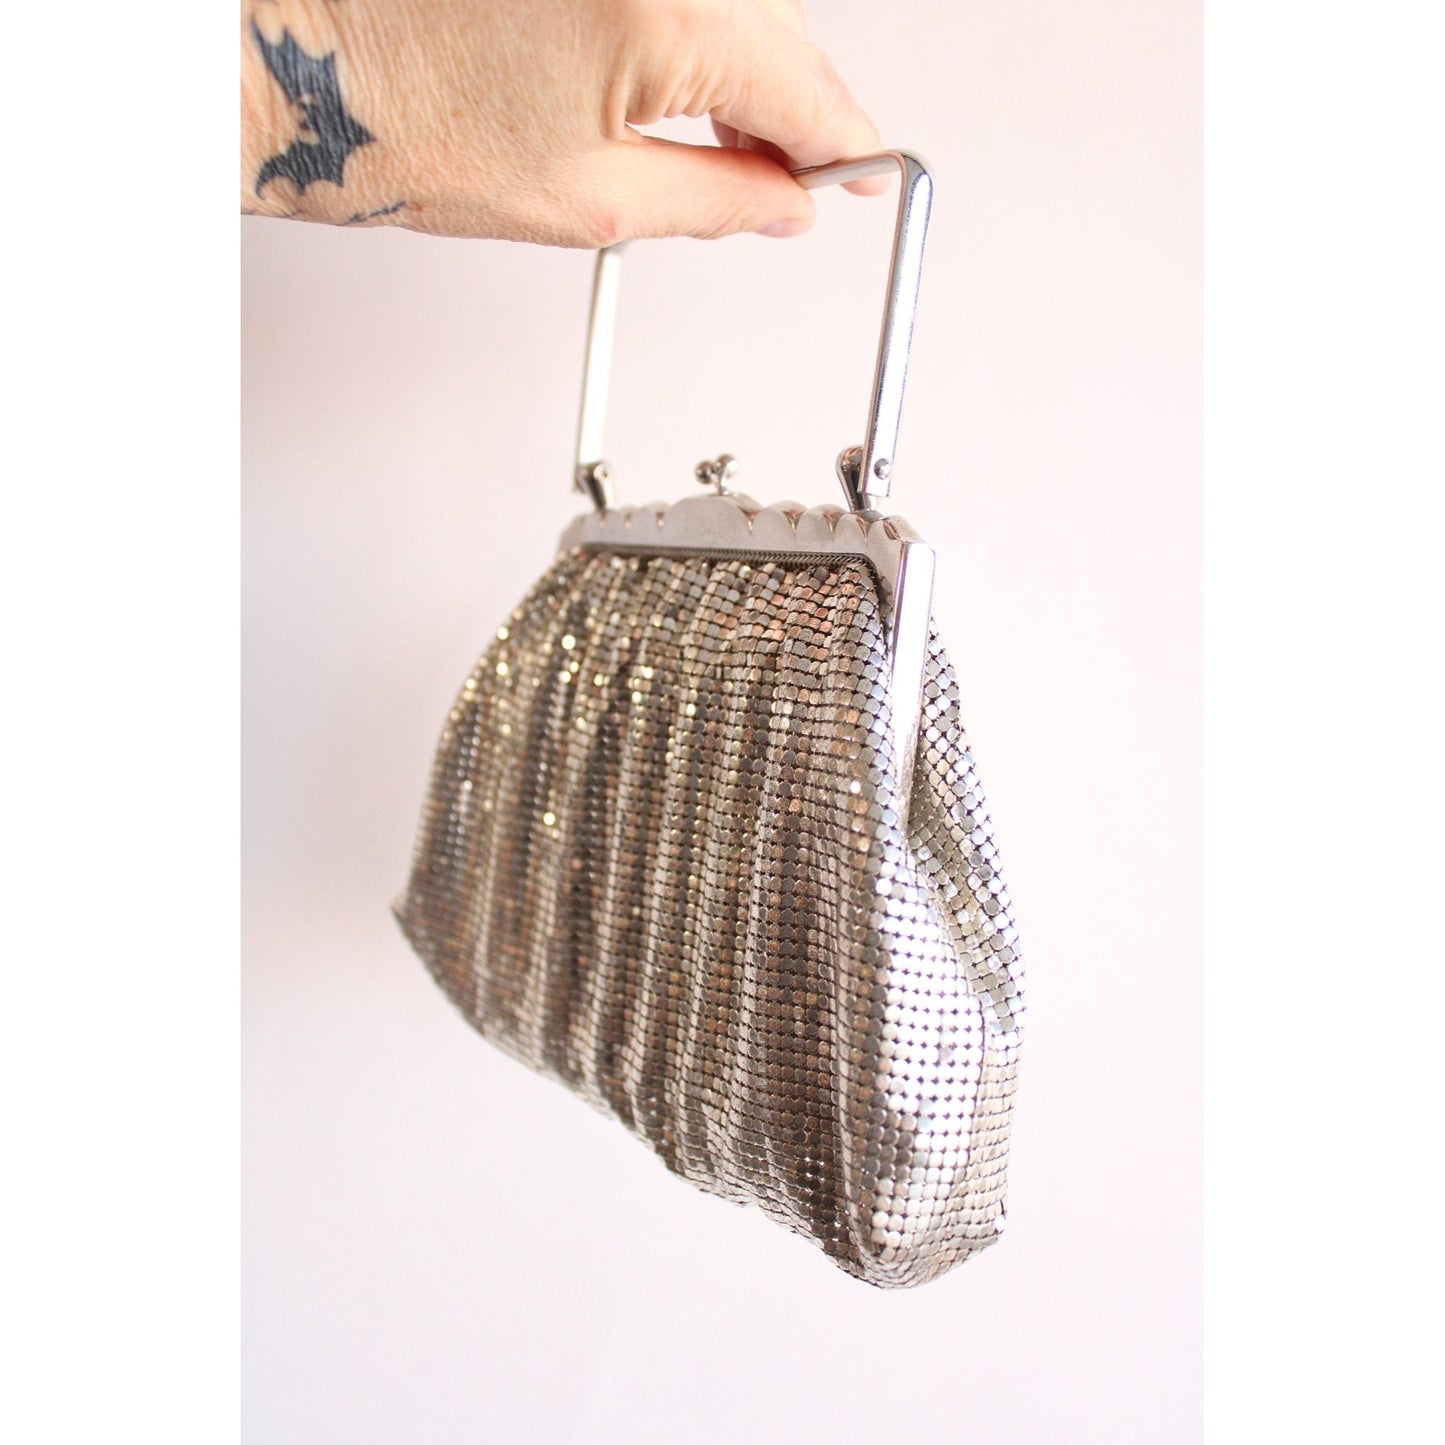 Vintage 1930s 1940s Silver Mesh Clutch by Whiting & Davis